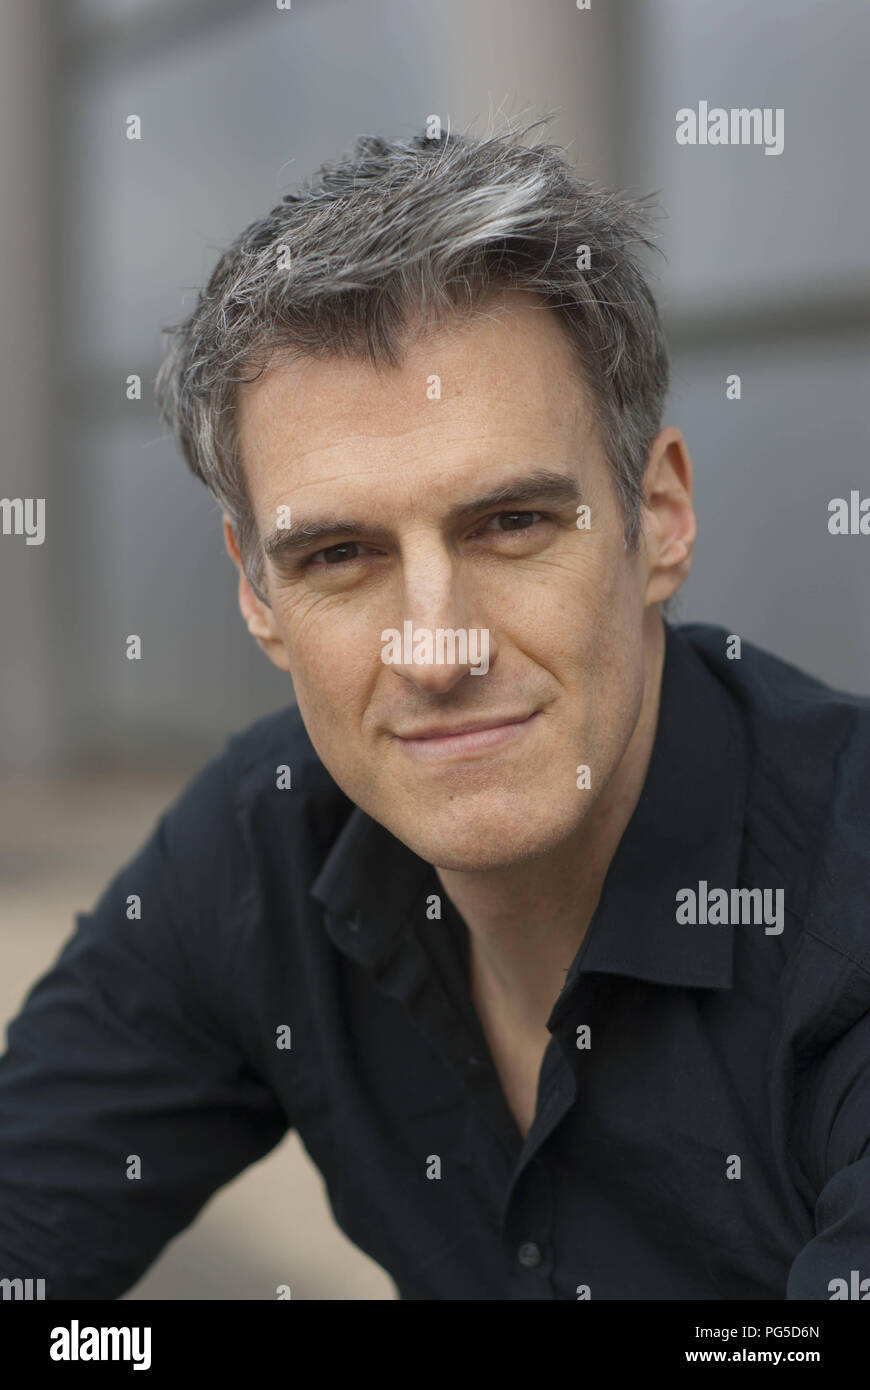 Leipzig, DEU, 13.03.2015: Portrait Thomas Raab (Austria), thriller author and writer. Born 1970, he lives after completion of math and sports studies as a writer, composer and musician with his family in Vienna. Stock Photo